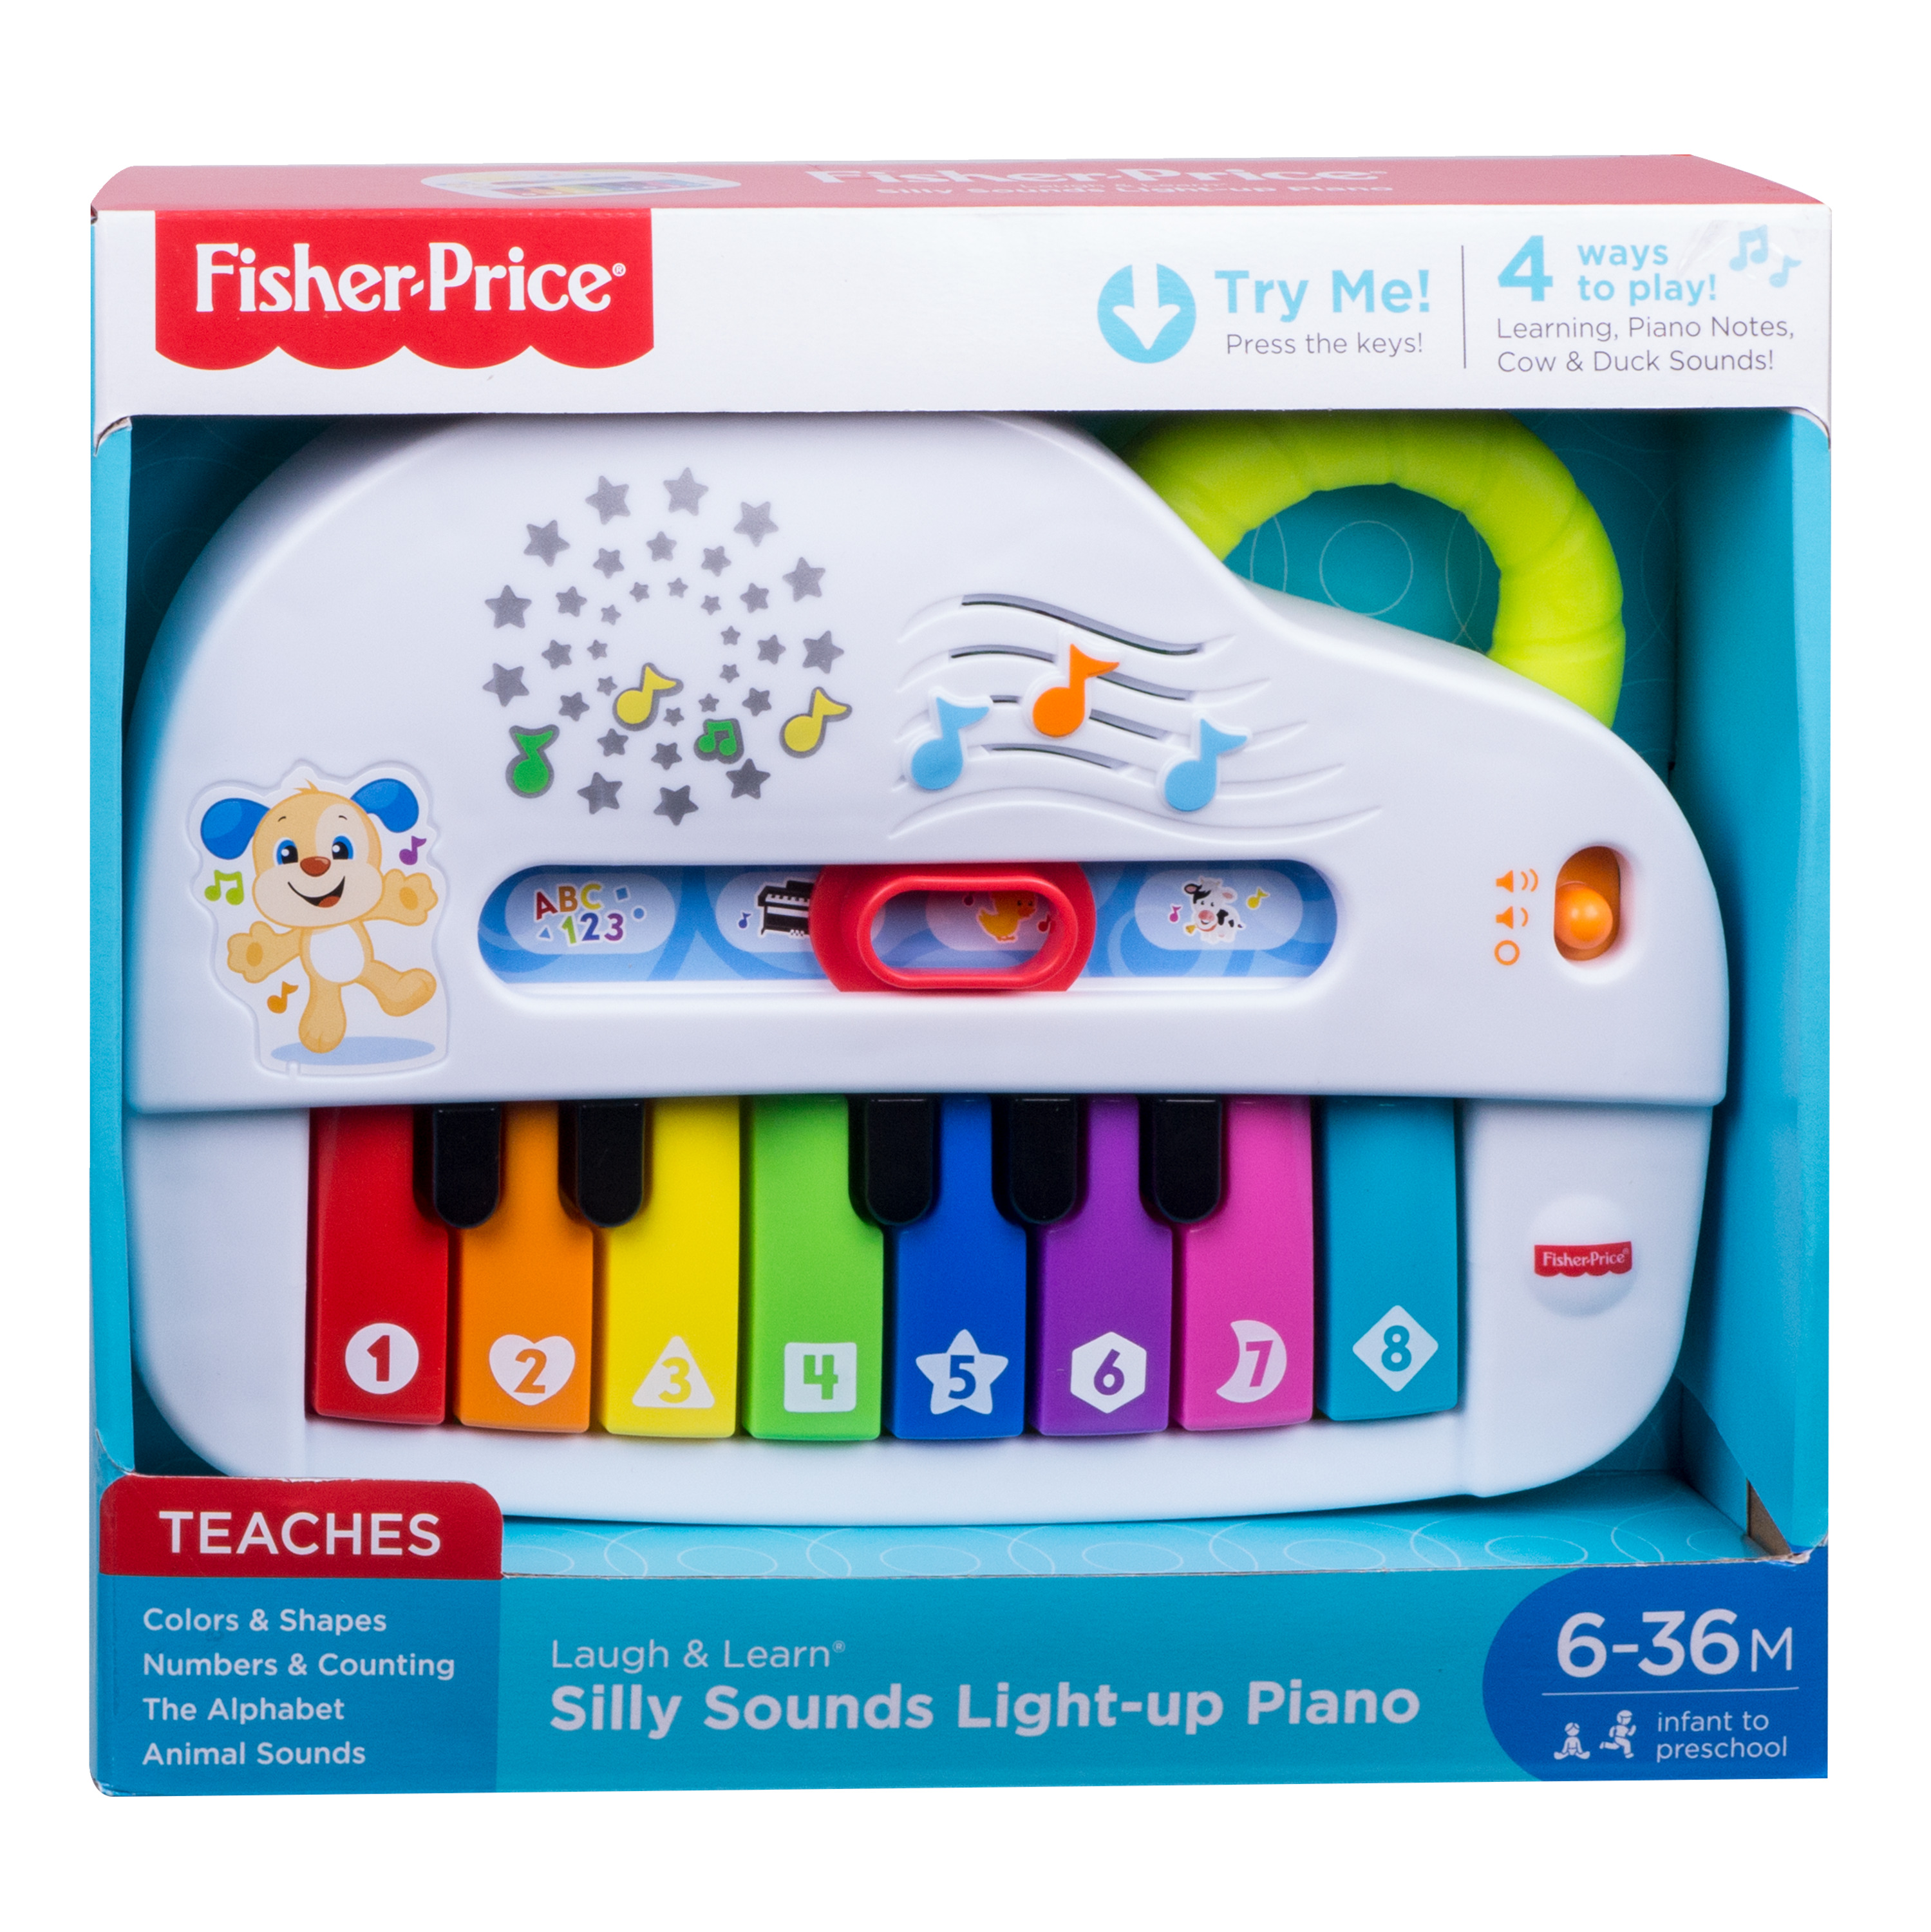 Fisher-Price Laugh & Learn Silly Sounds Light-Up Piano Interactive Toy for Baby & Toddler - image 7 of 7